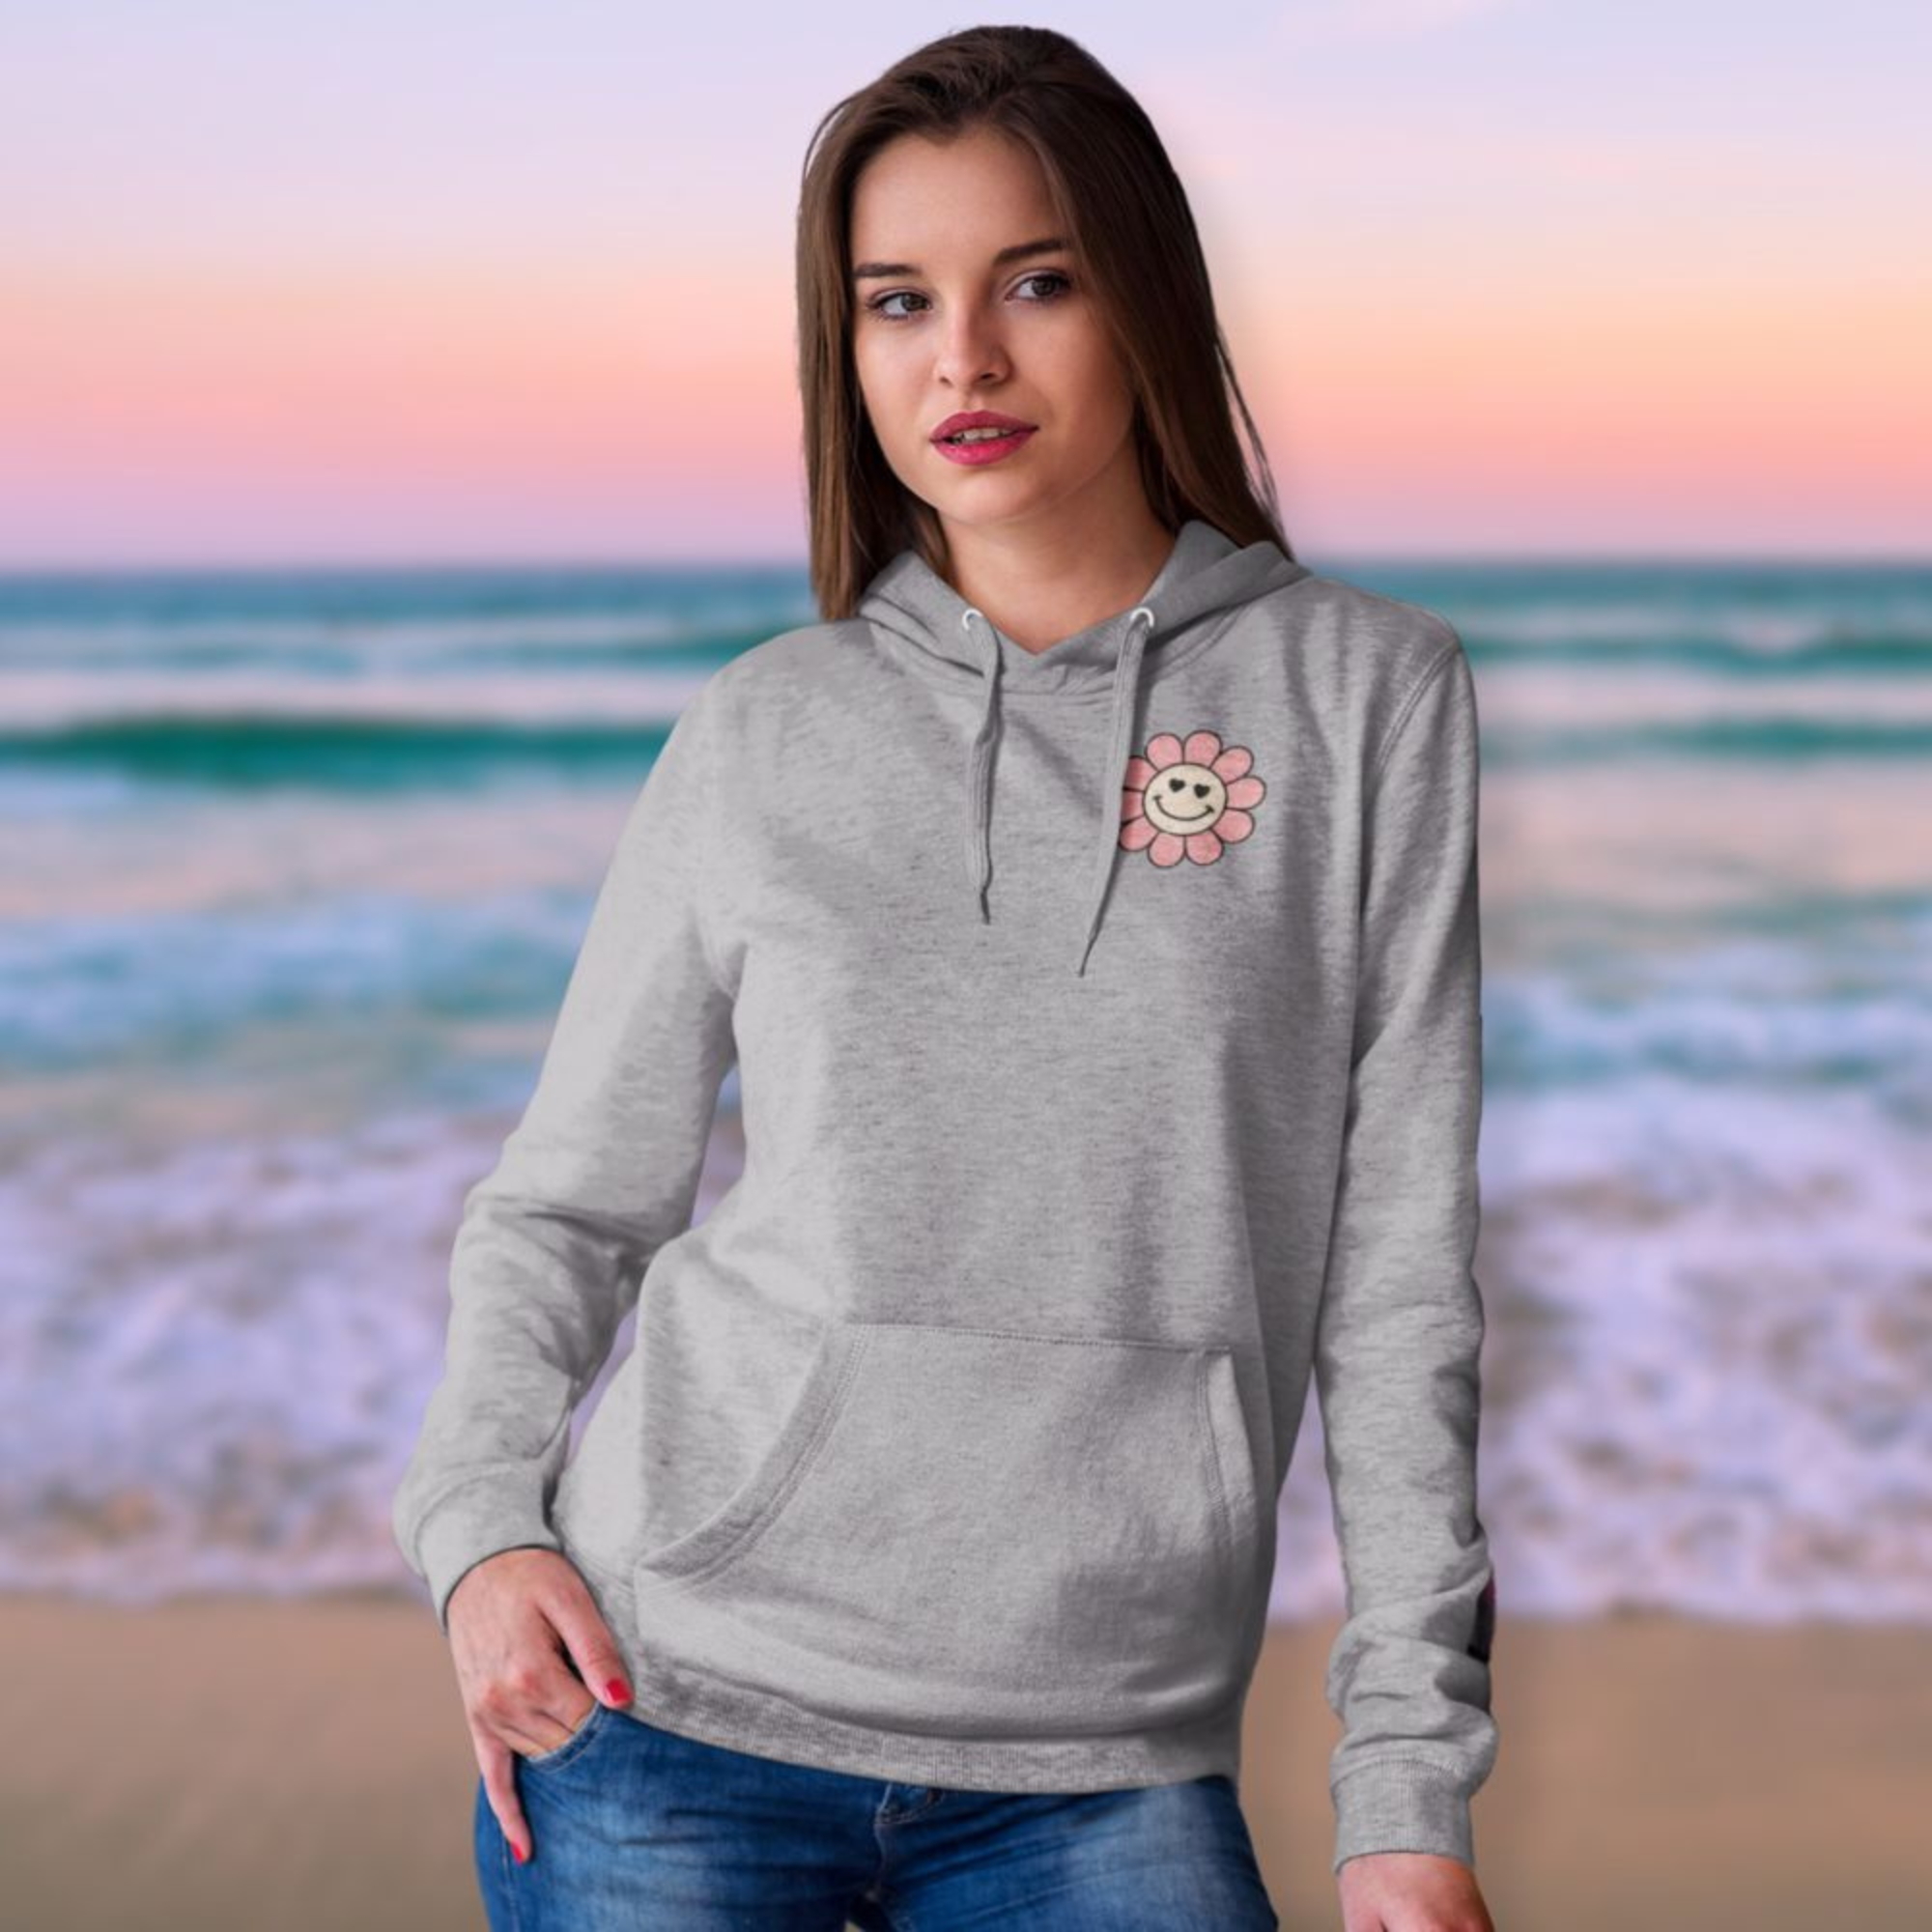 You Were Created for a Purpose Unisex-Fit Hoodie Colors: Sport Grey Sizes: S Jesus Passion Apparel